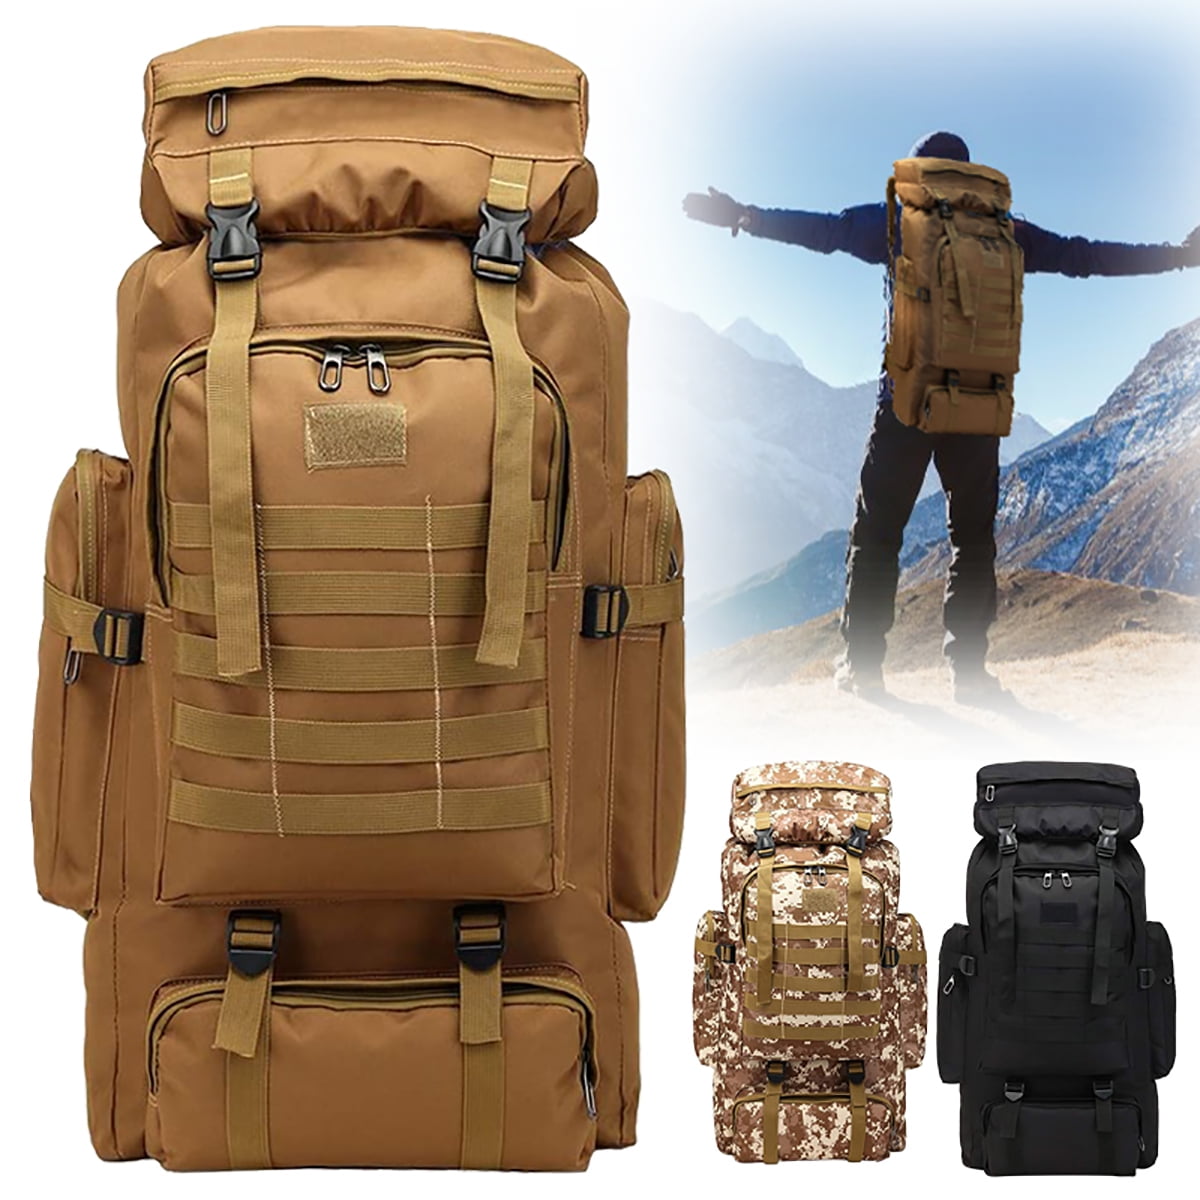 Classic Series: Outdoor Travel Backpack | Camel Mountain Bags - YouTube